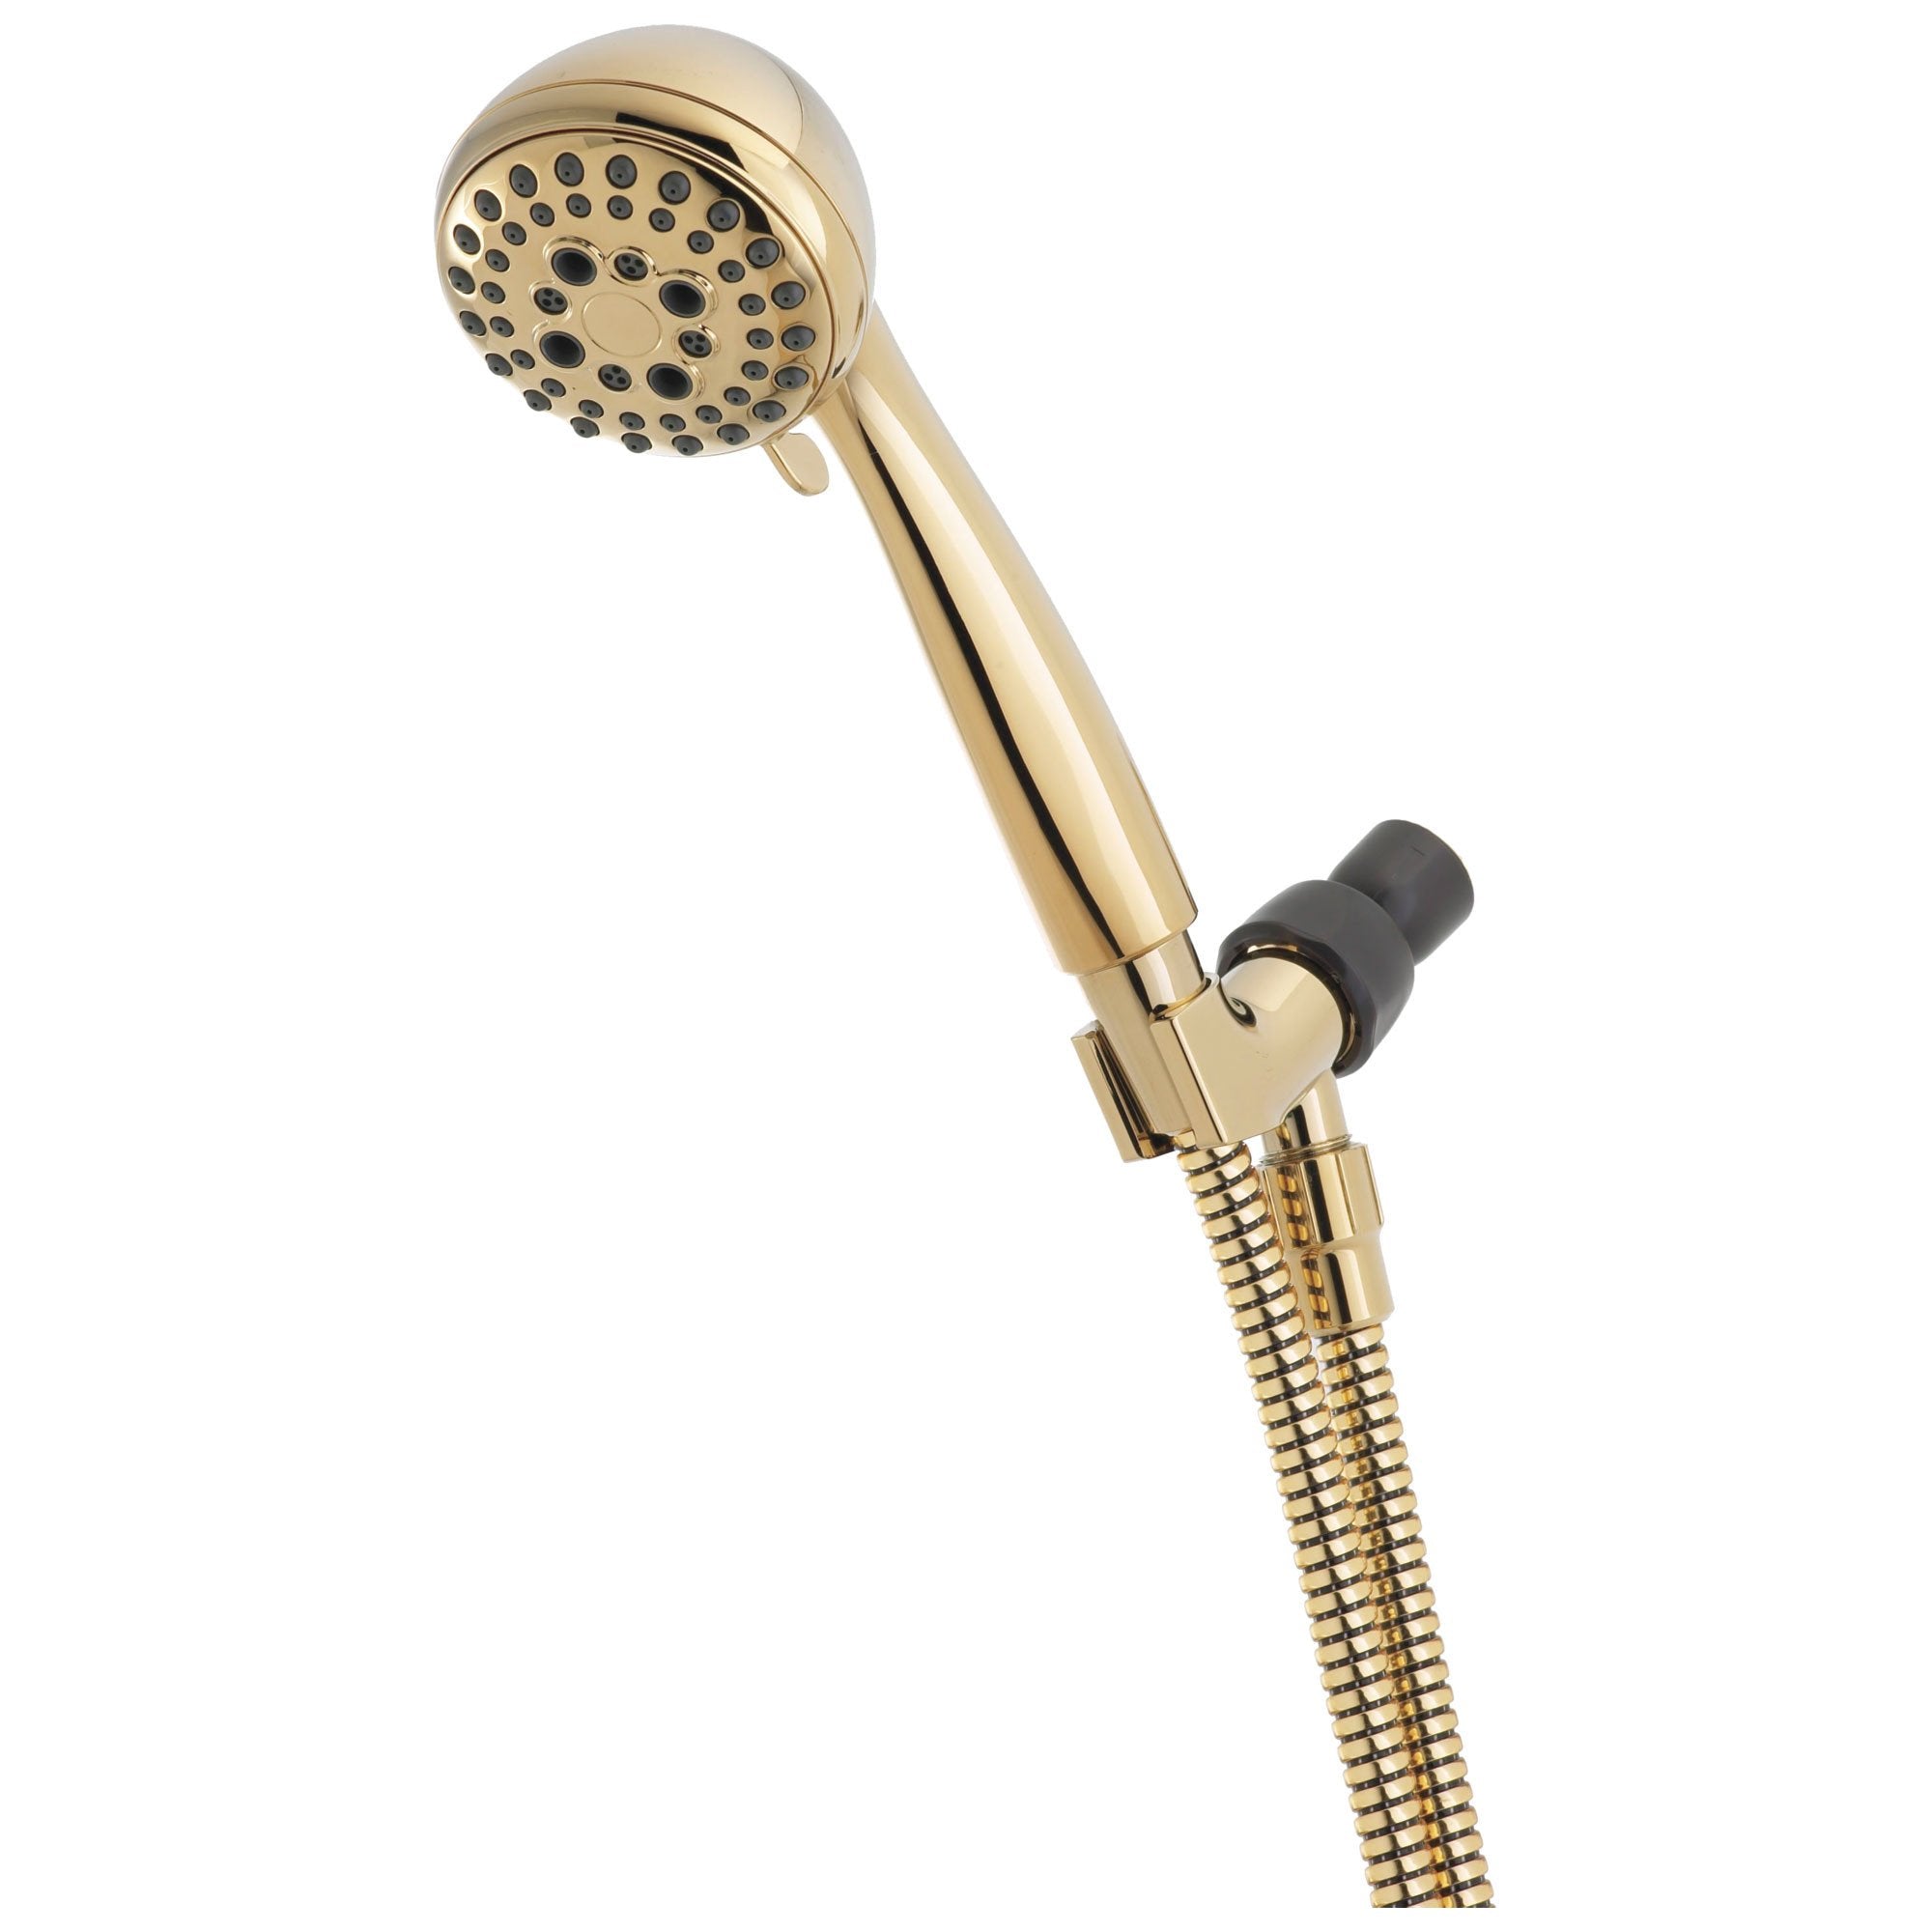 Delta Universal Showering Components Collection Polished Brass Finish Shower Arm Mount 5-Setting Hand Shower with Hose D75502PB